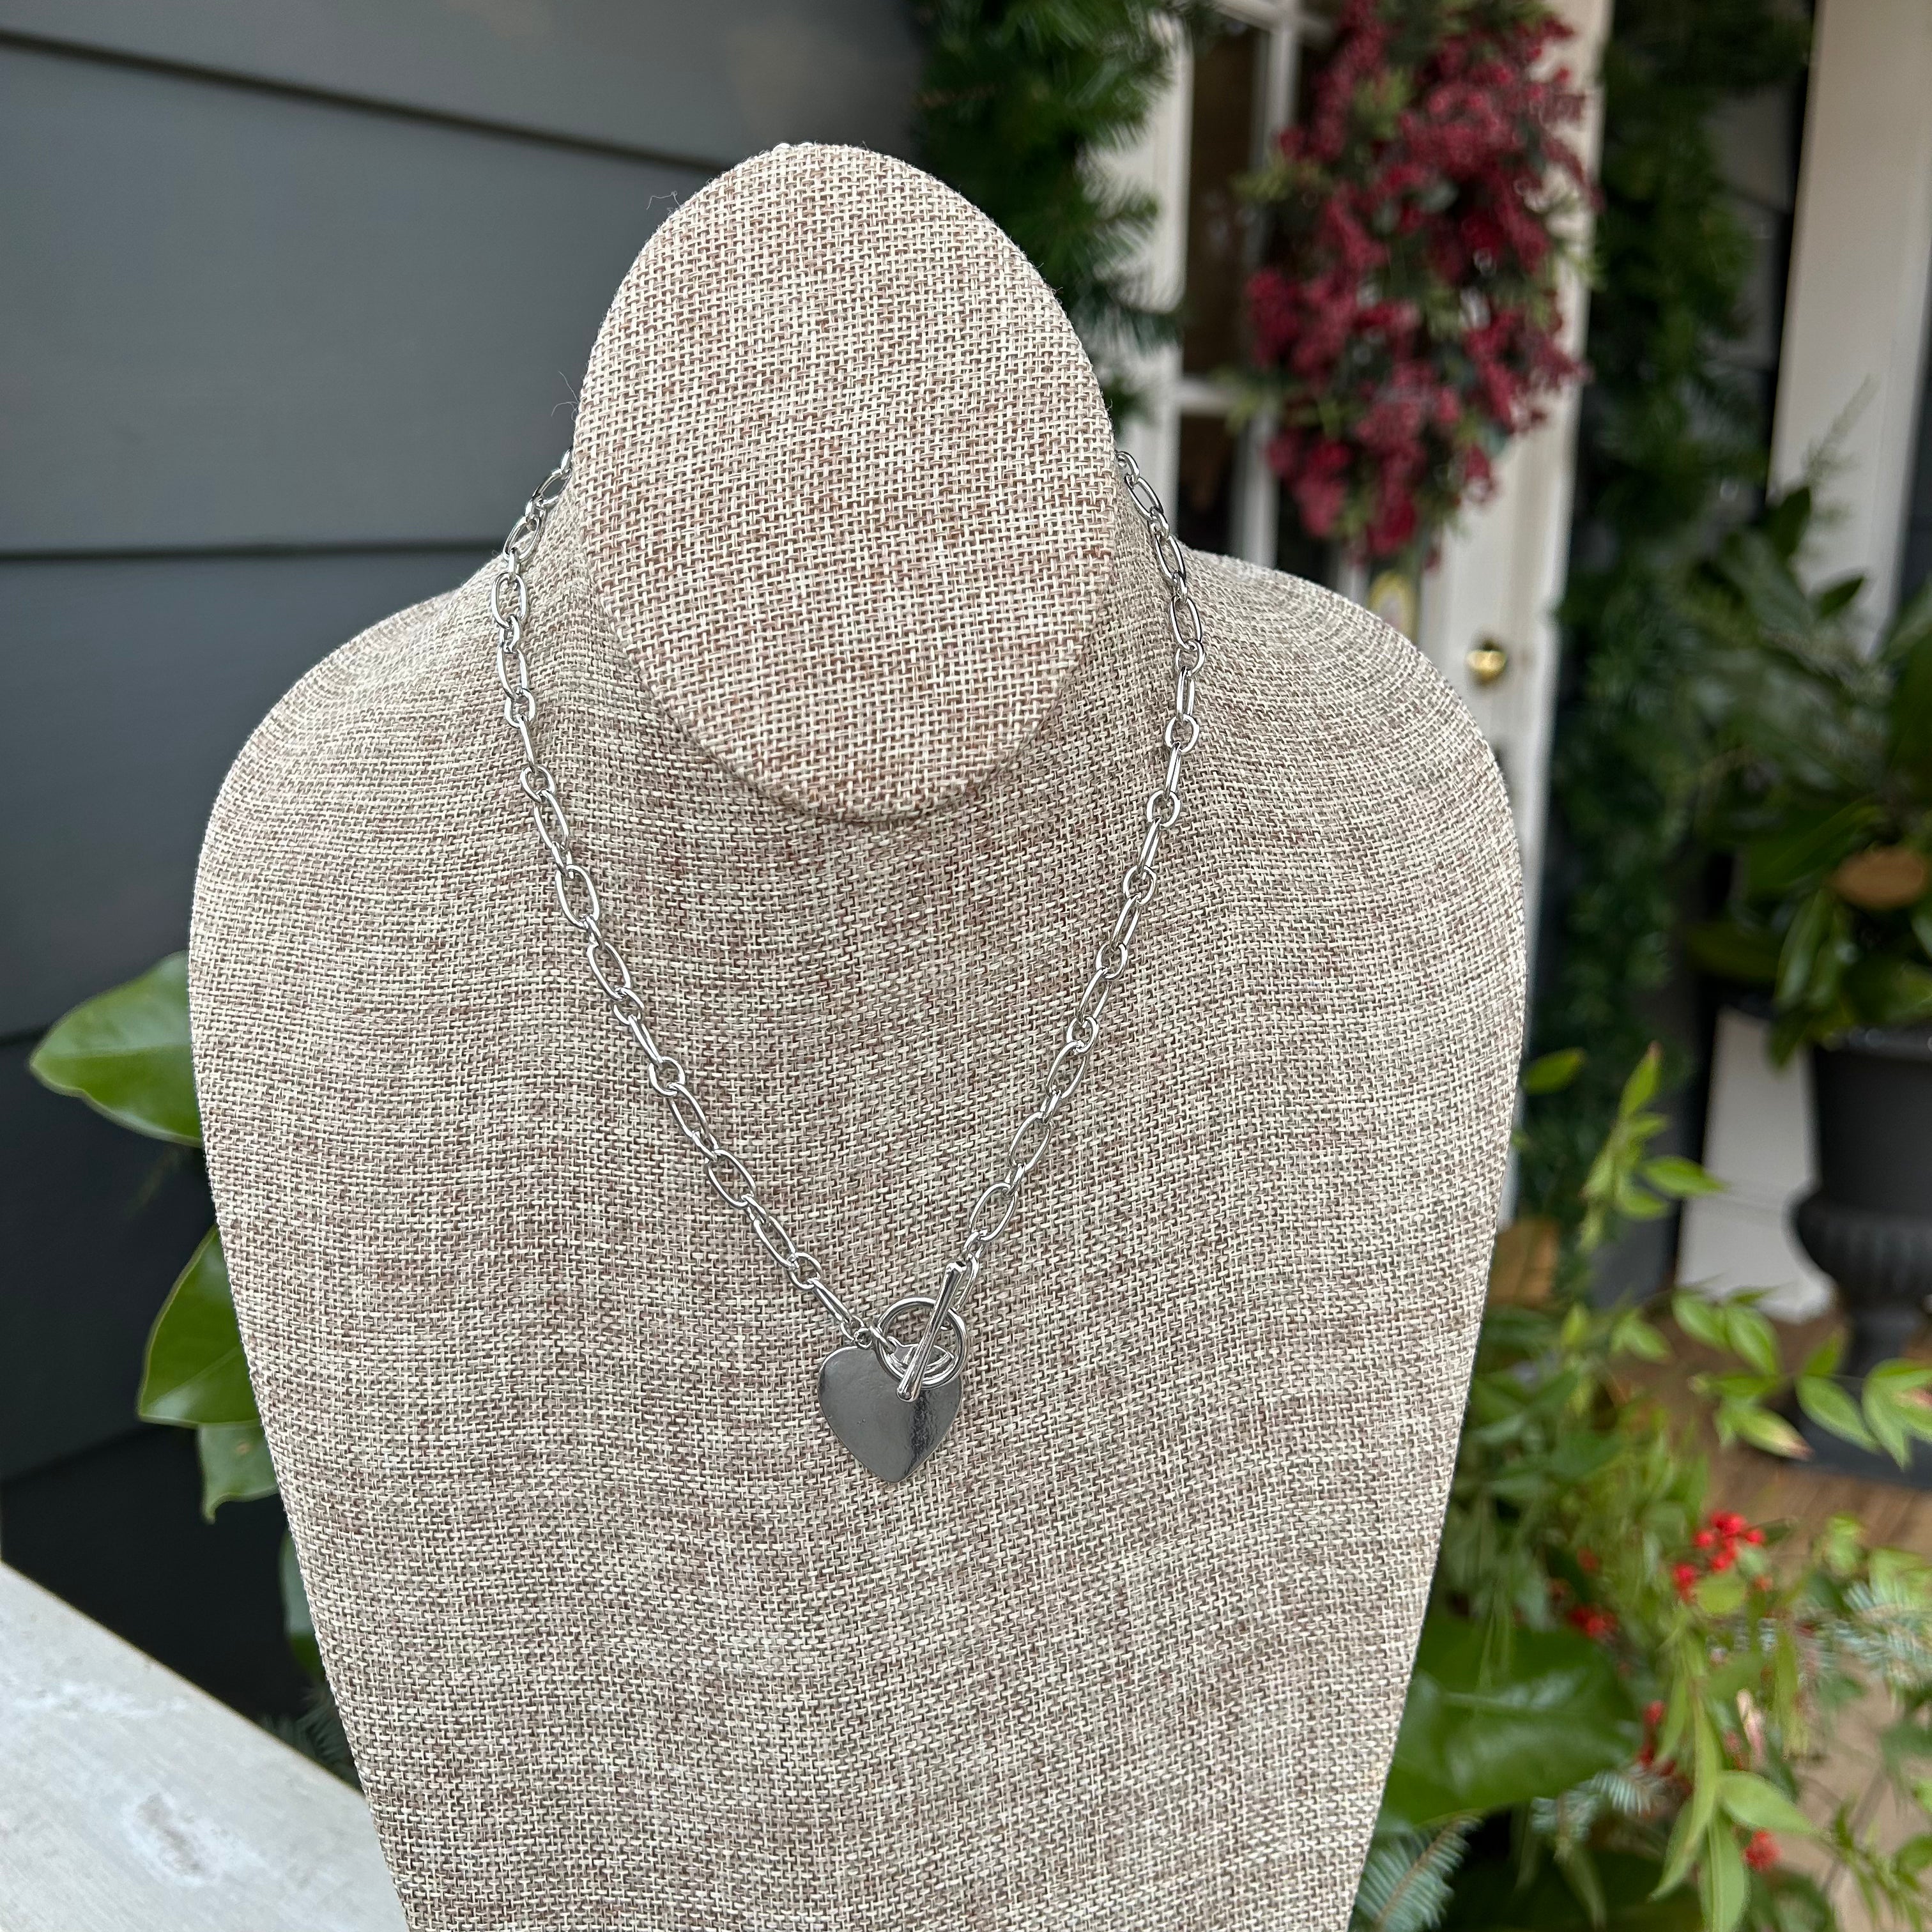 Look stylish in this gorgeous Short Silver Necklace with Heart Pendant. Its beautifully crafted solid heart pendant and T-bar clasp combine for a contemporary take on classic elegance. Add the perfect finishing touch to your outfit!  Approximate length: 17"